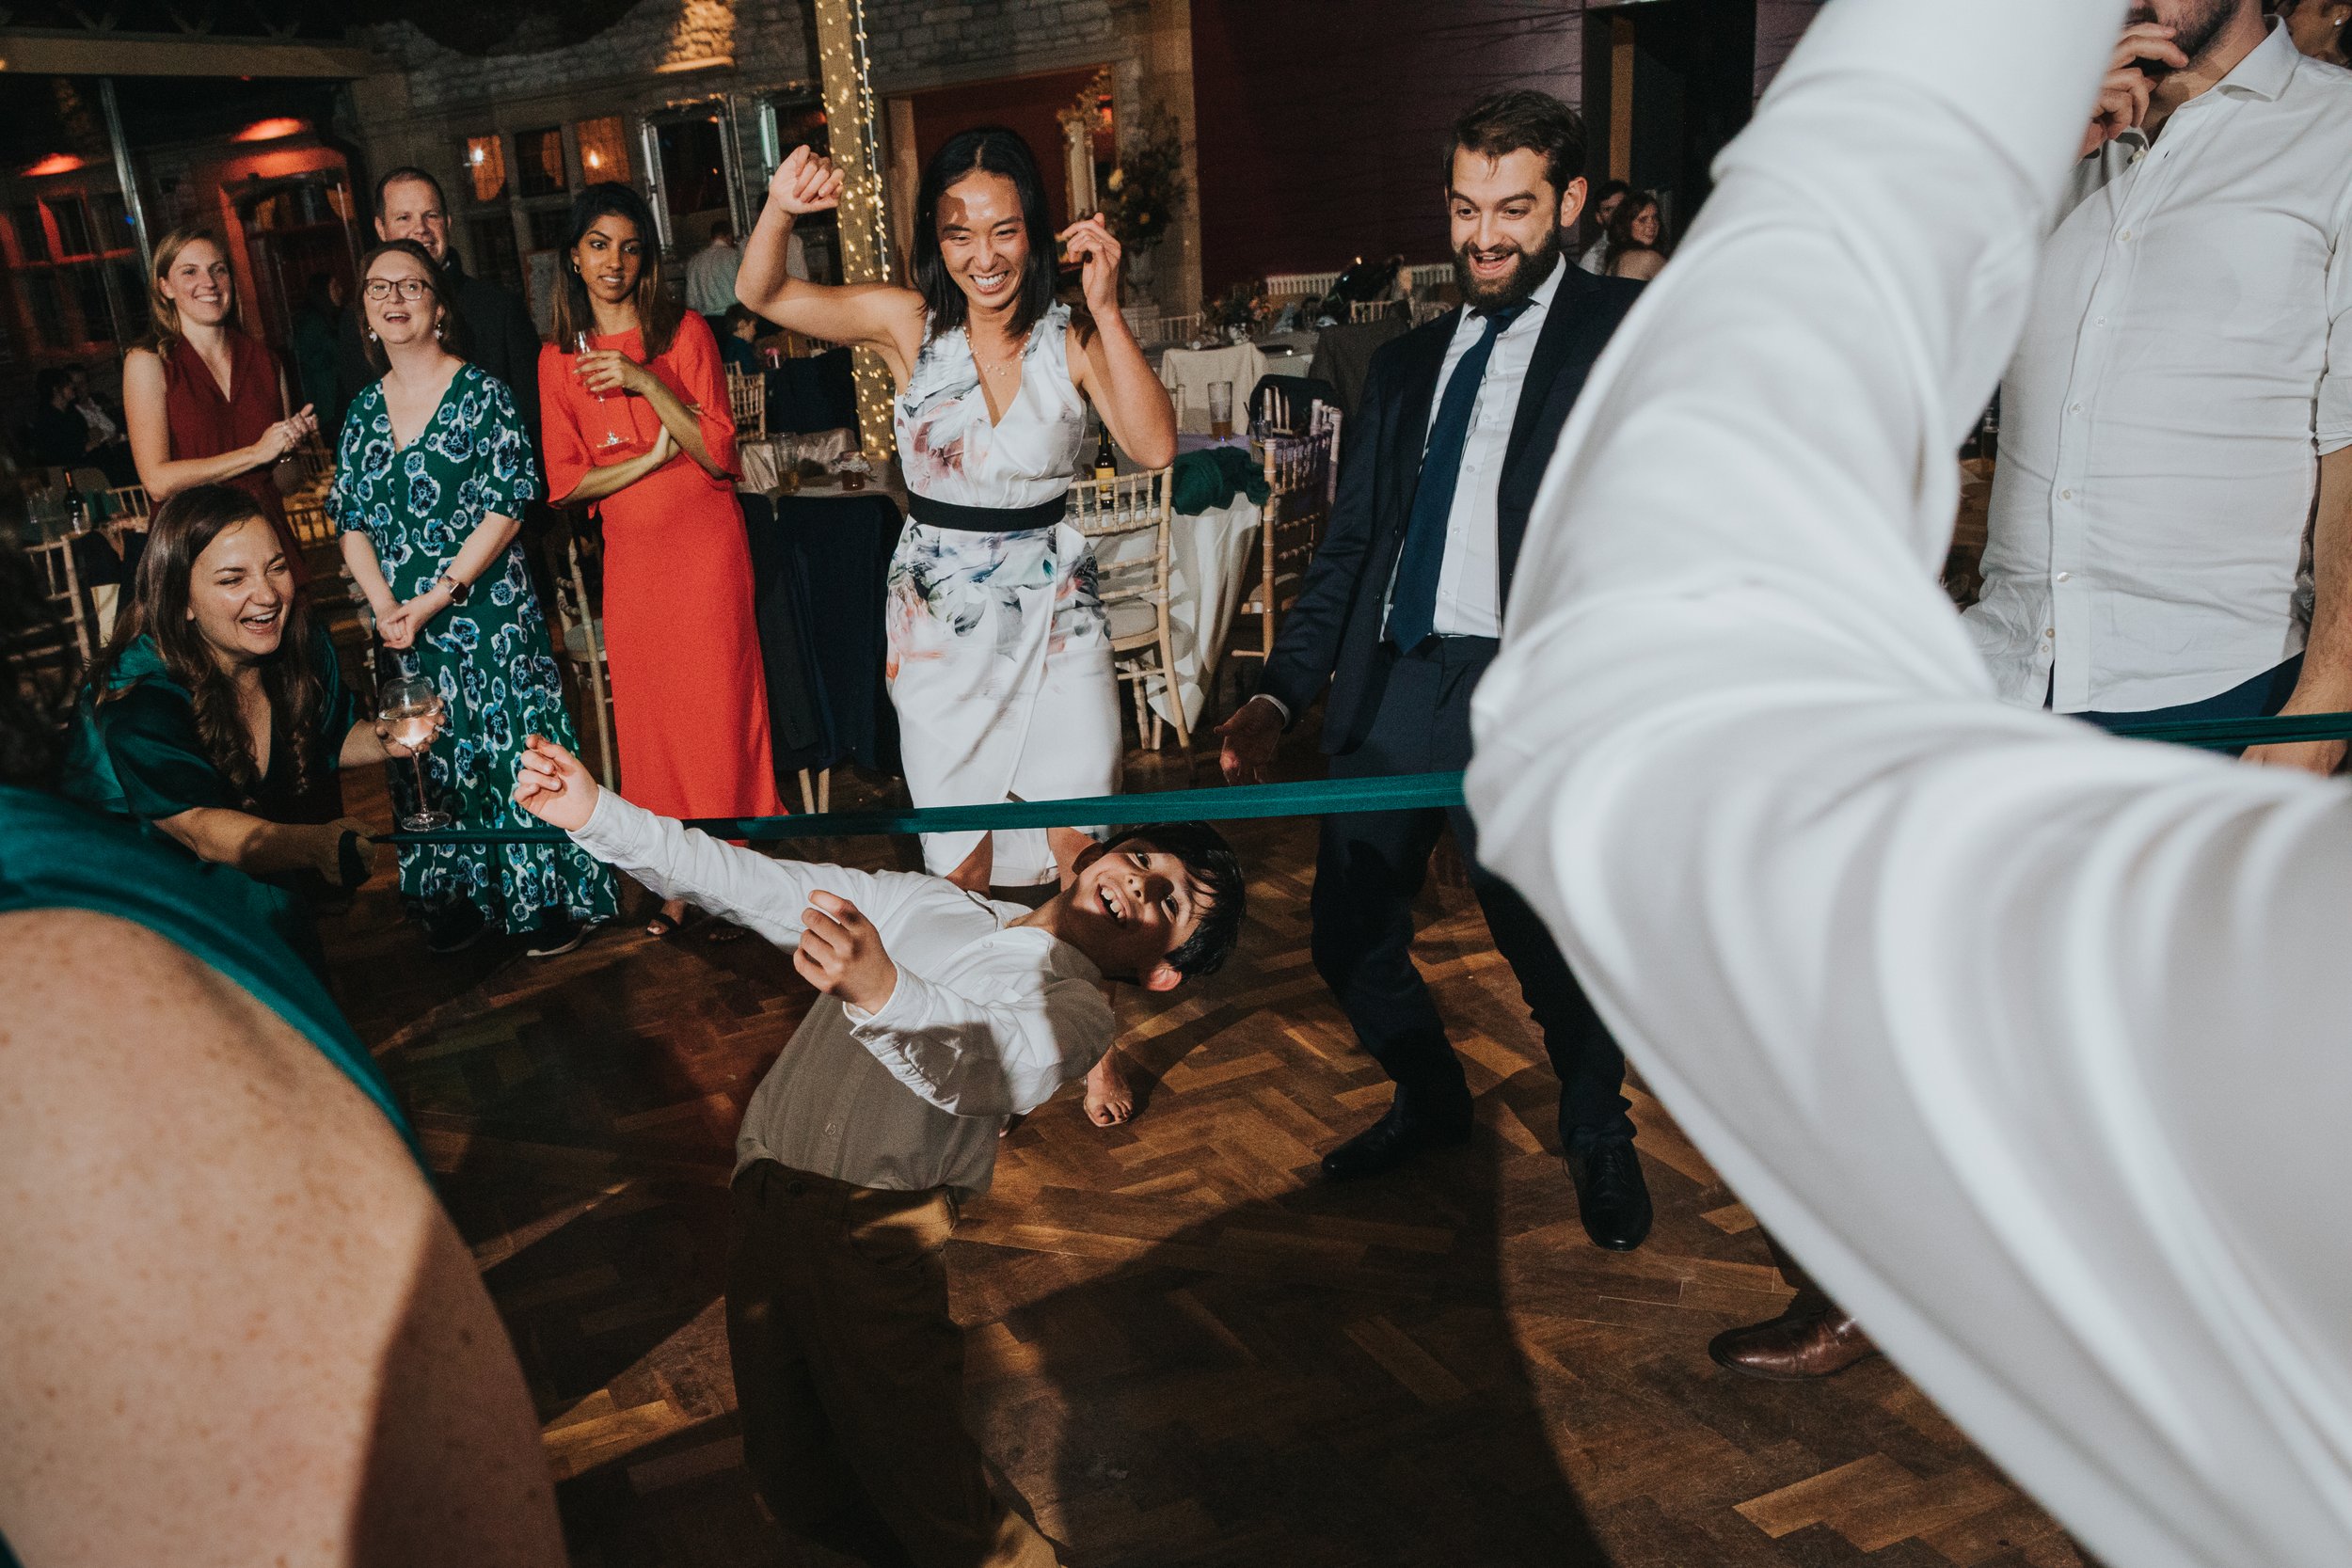 Child smiles while doing the limbo on dance floor. 